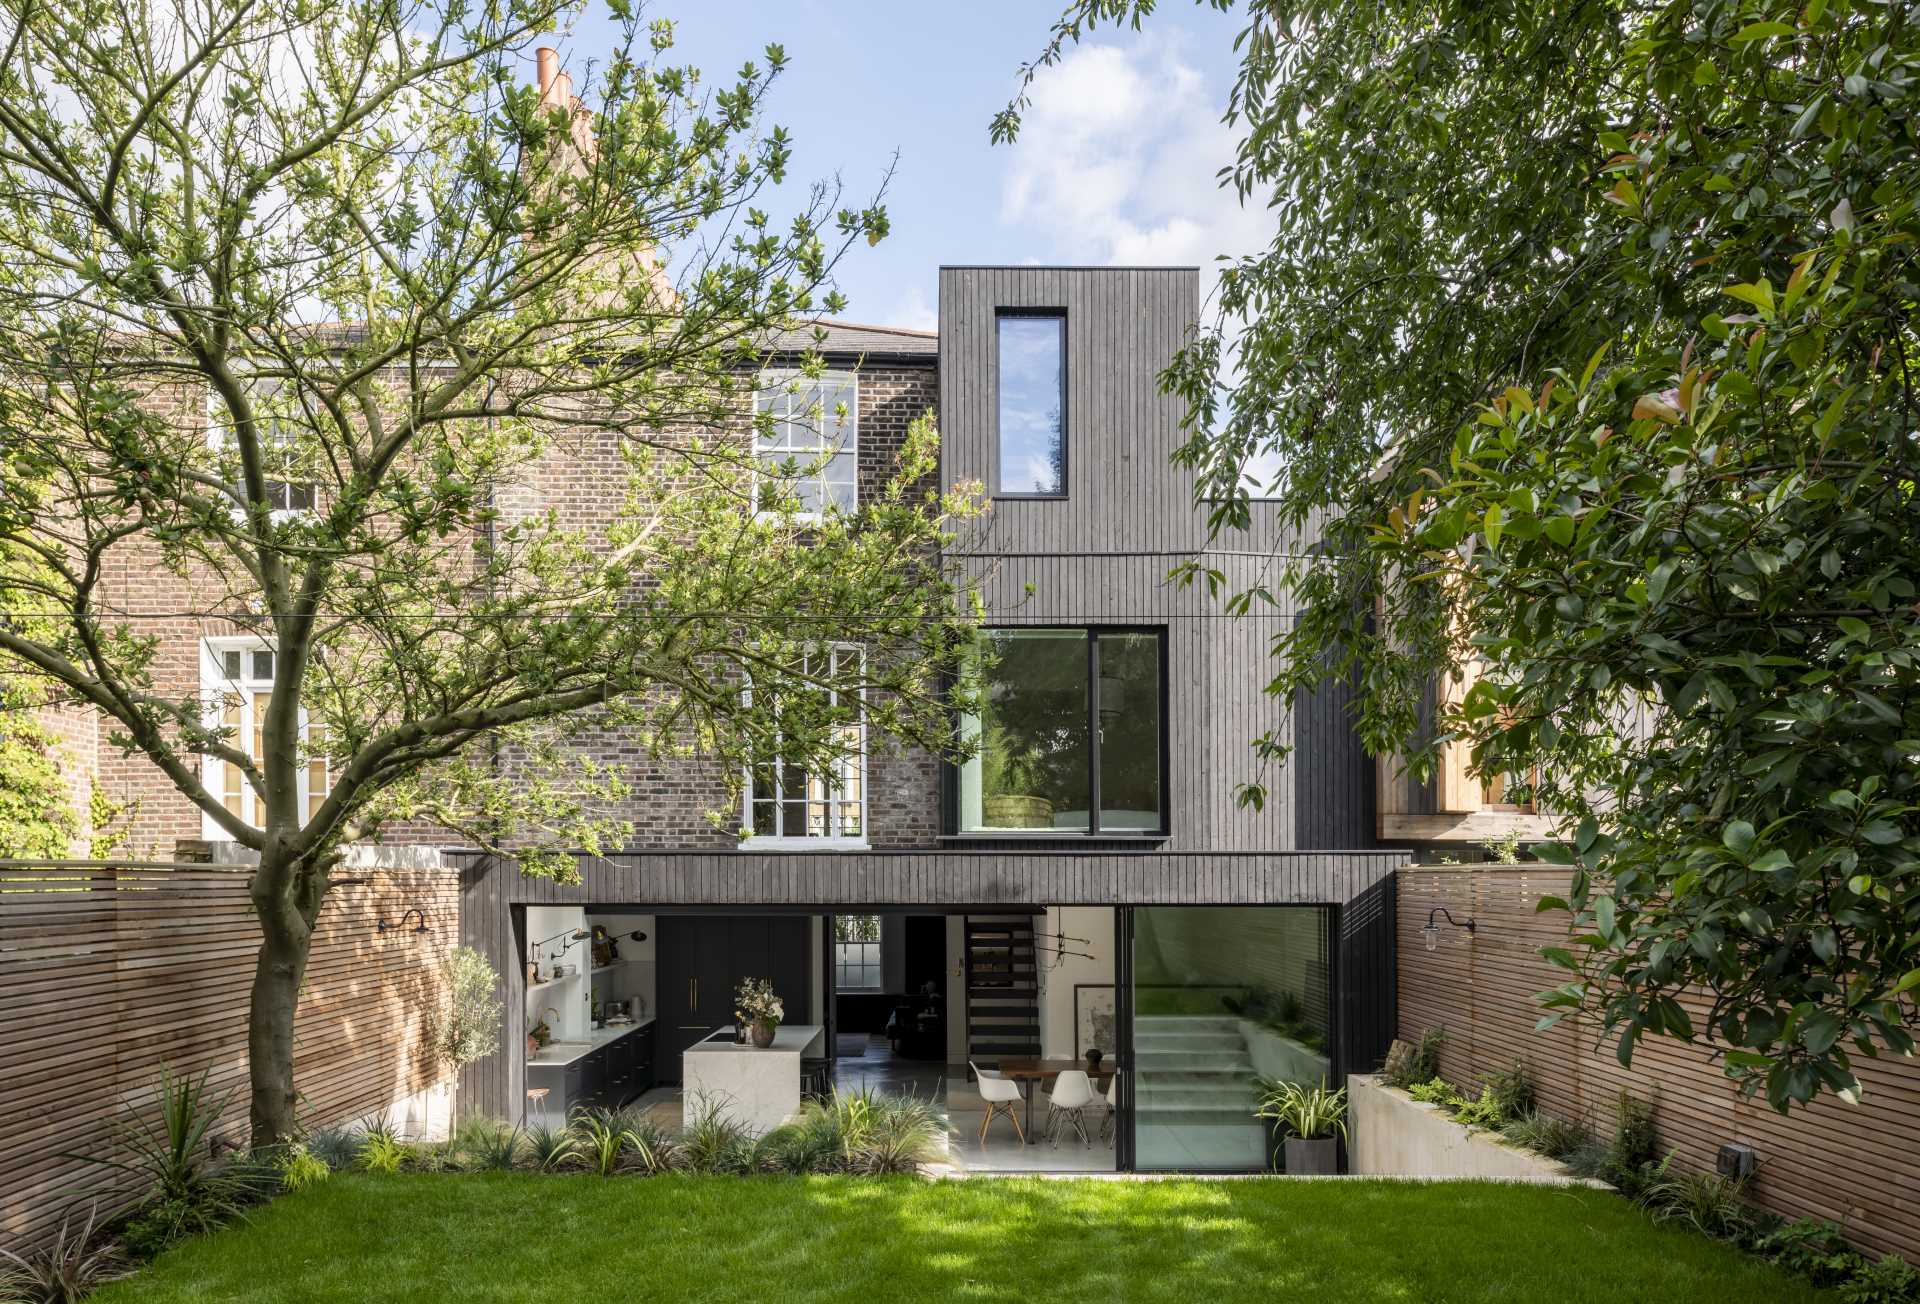 Architectural practice Paul Archer Design, has completed a full-house refurbishment and wood-clad rear extension of a semi-detached home in North London, England.